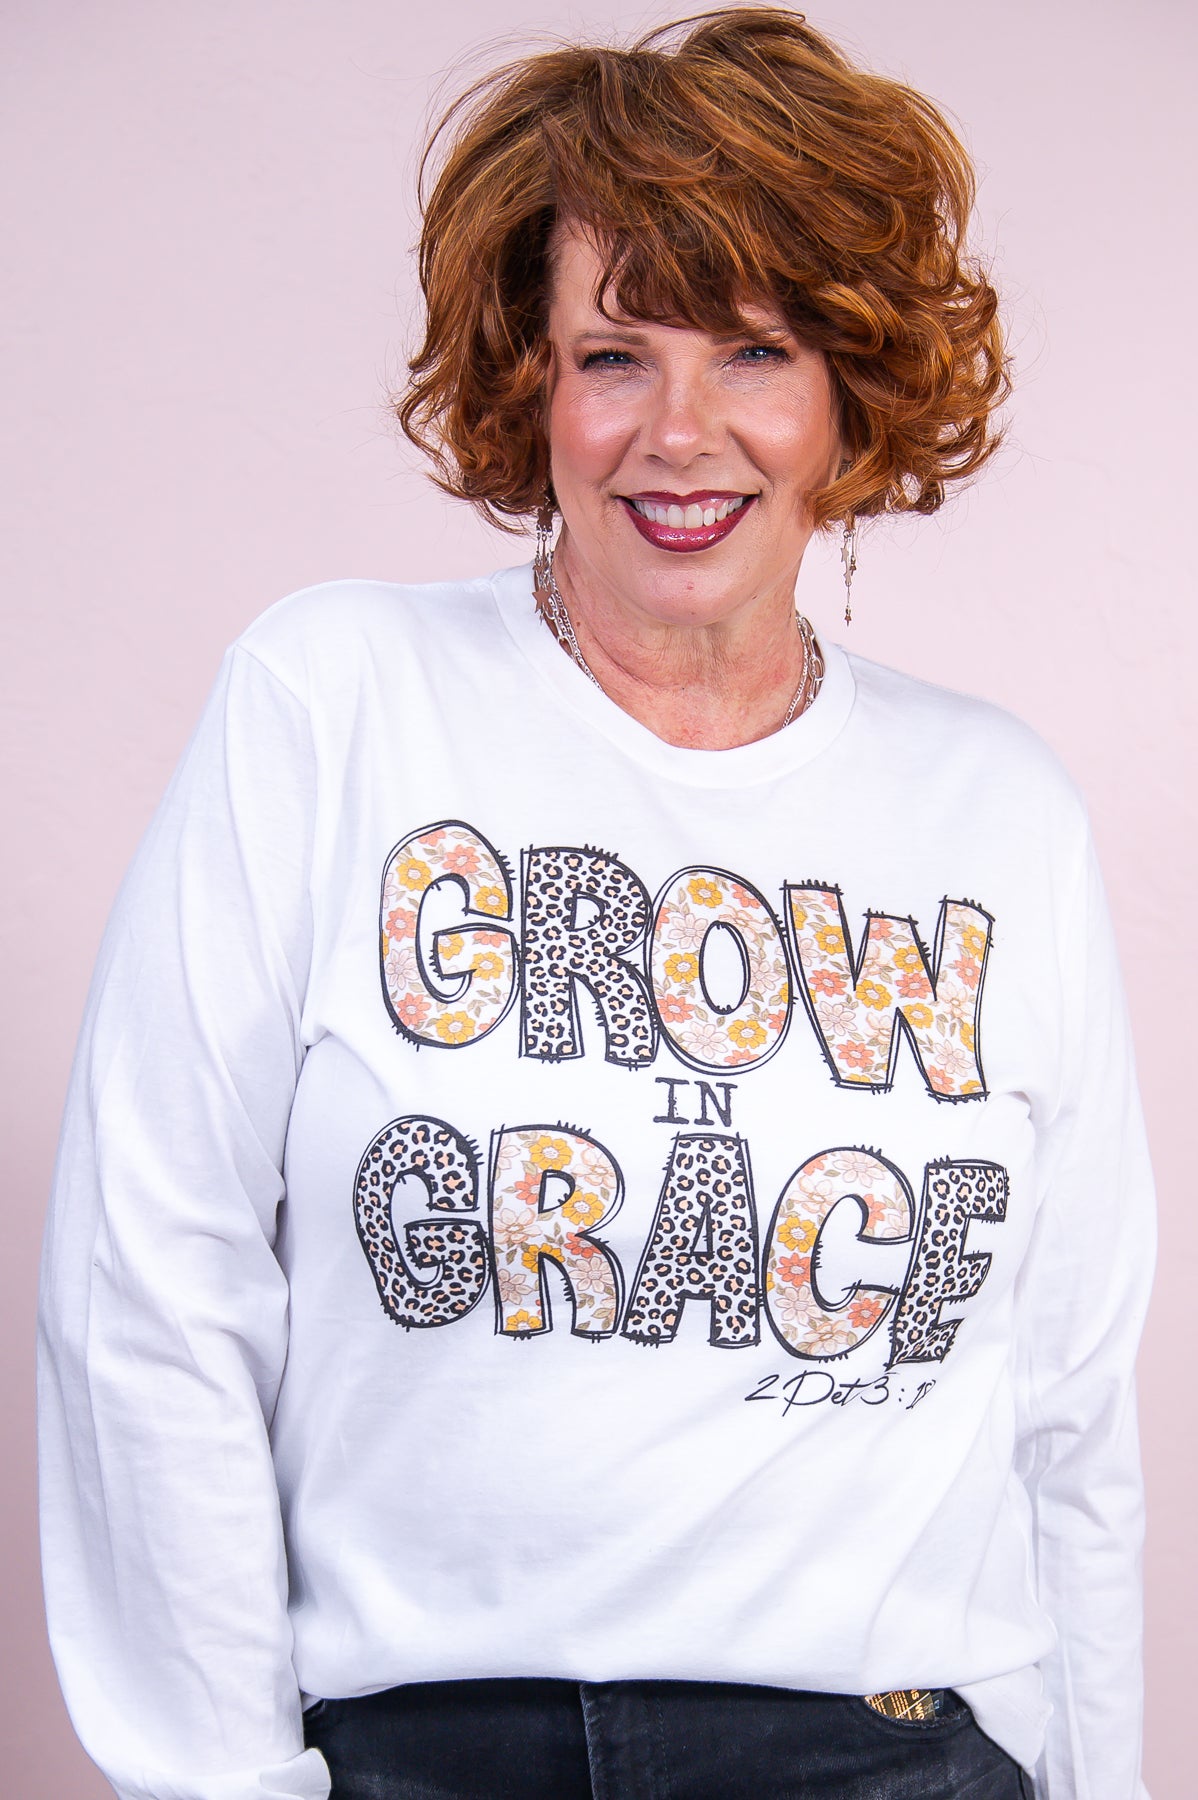 Grow In Grace White Long Sleeve Graphic Tee - A3210WH